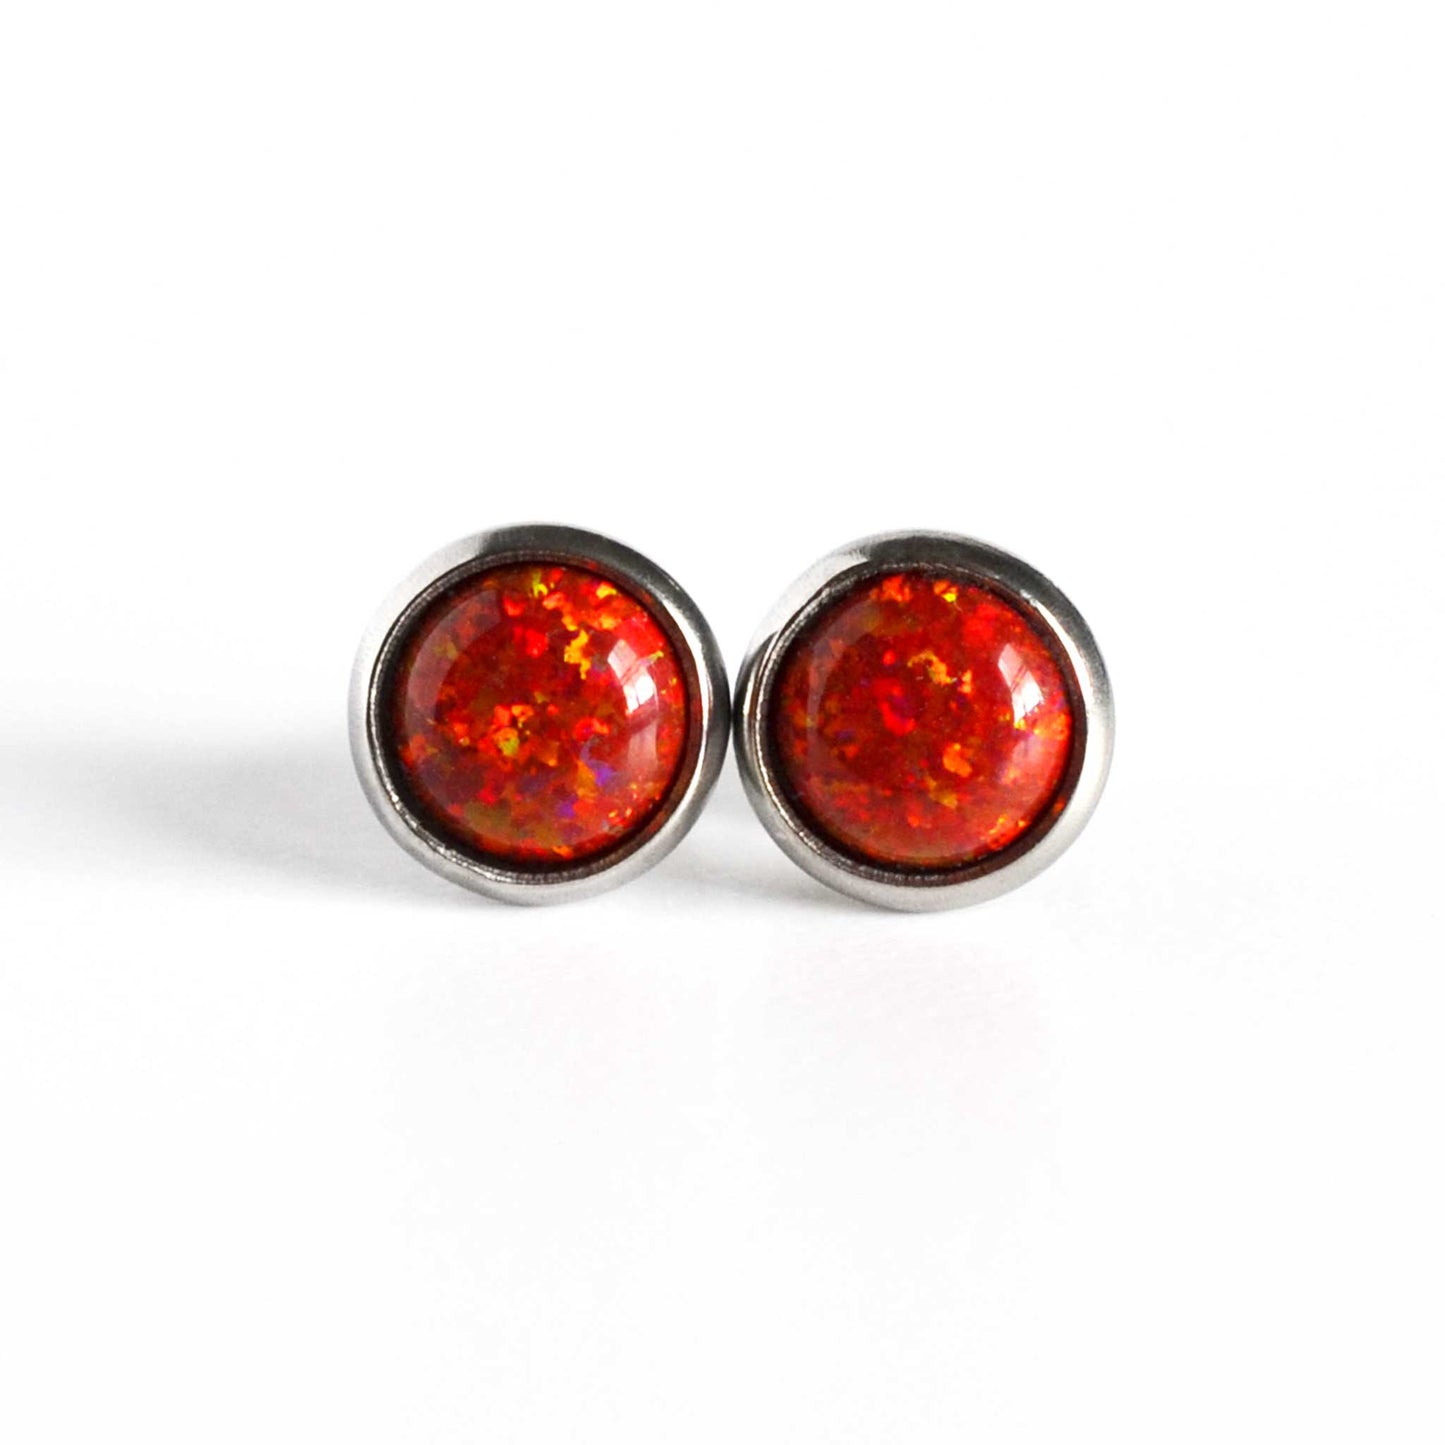 Front view of red Opal stud earrings on white background